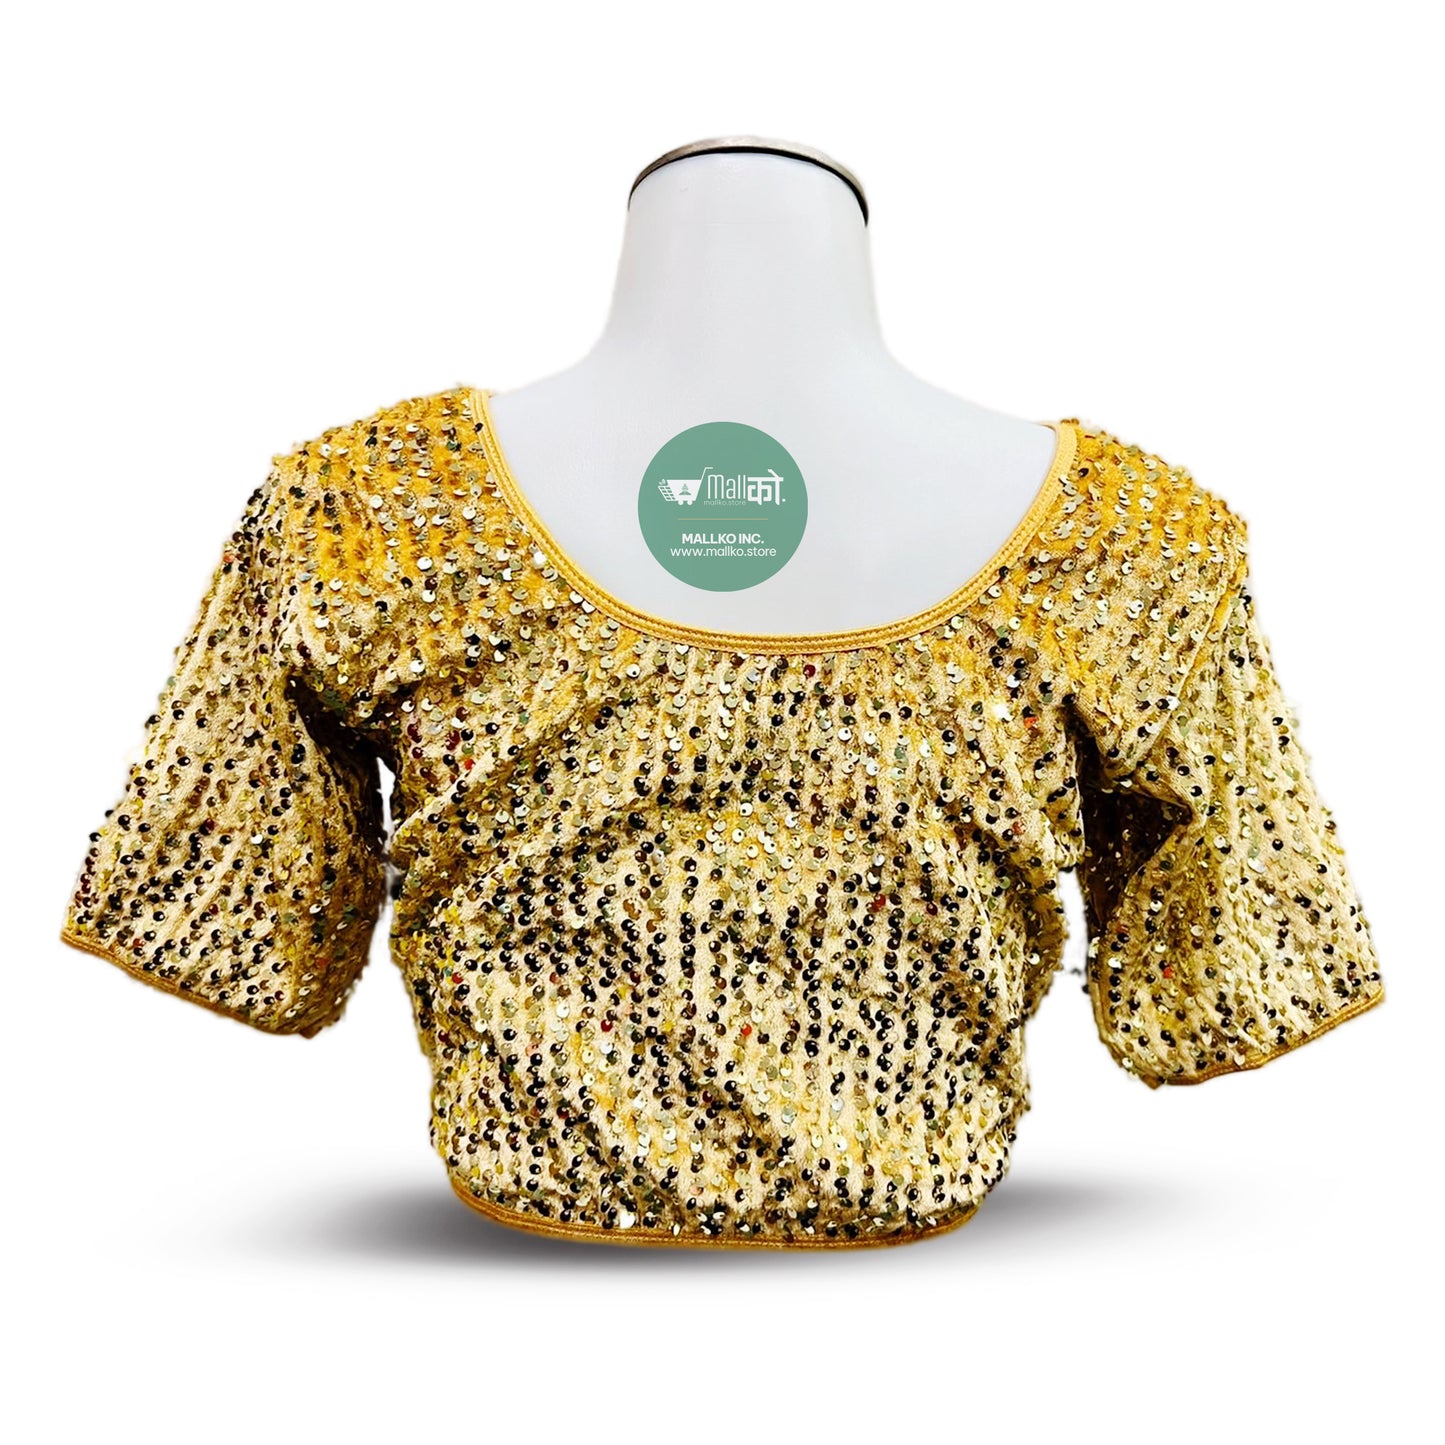 Women's Sparkling  Gold Double shaded Sari Blouse / Crop Top.